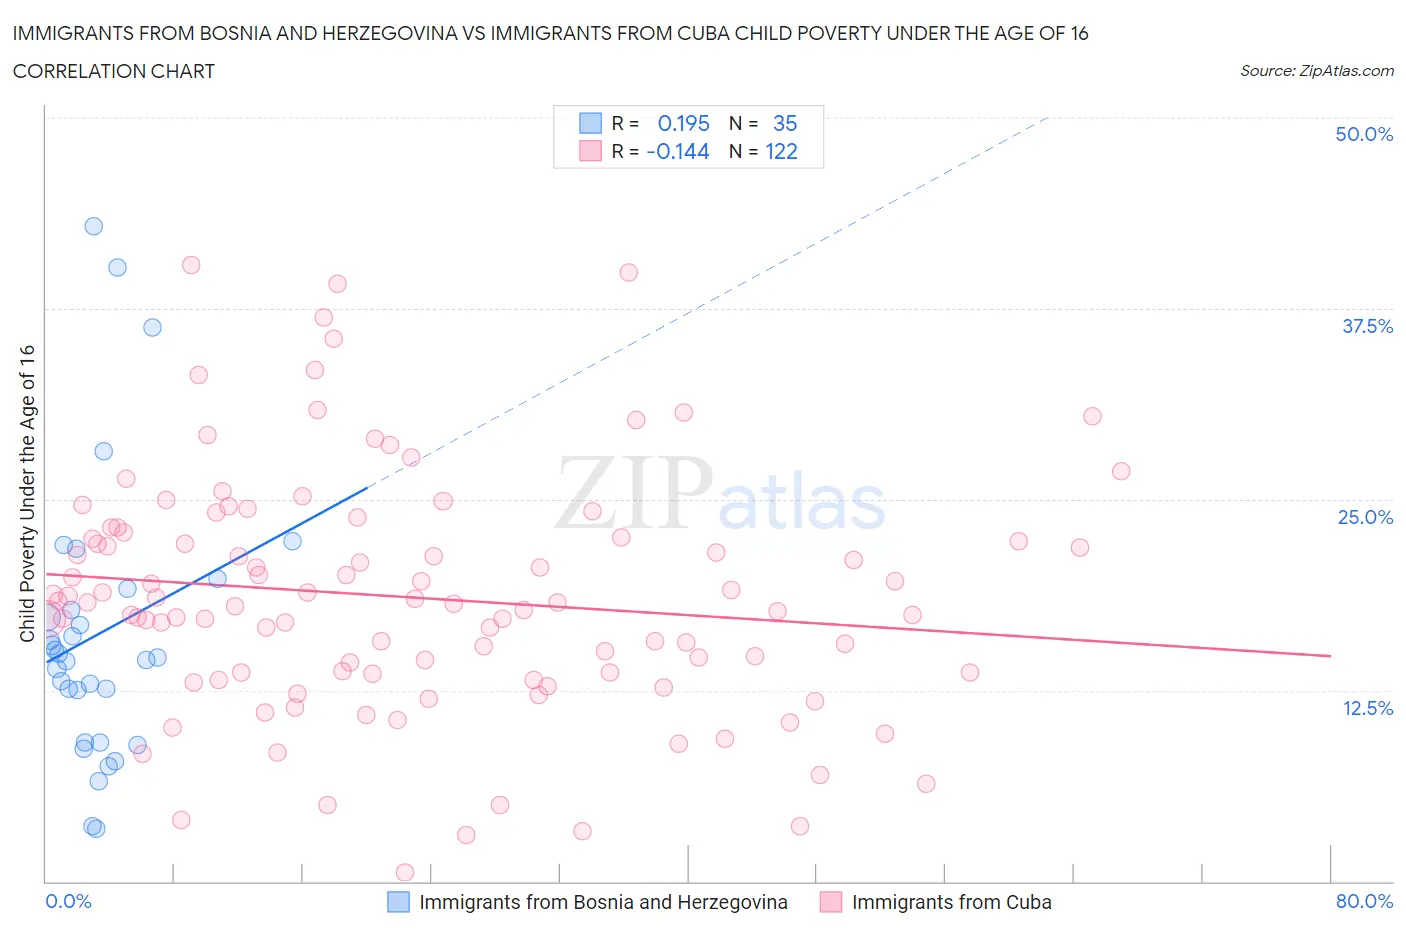 Immigrants from Bosnia and Herzegovina vs Immigrants from Cuba Child Poverty Under the Age of 16